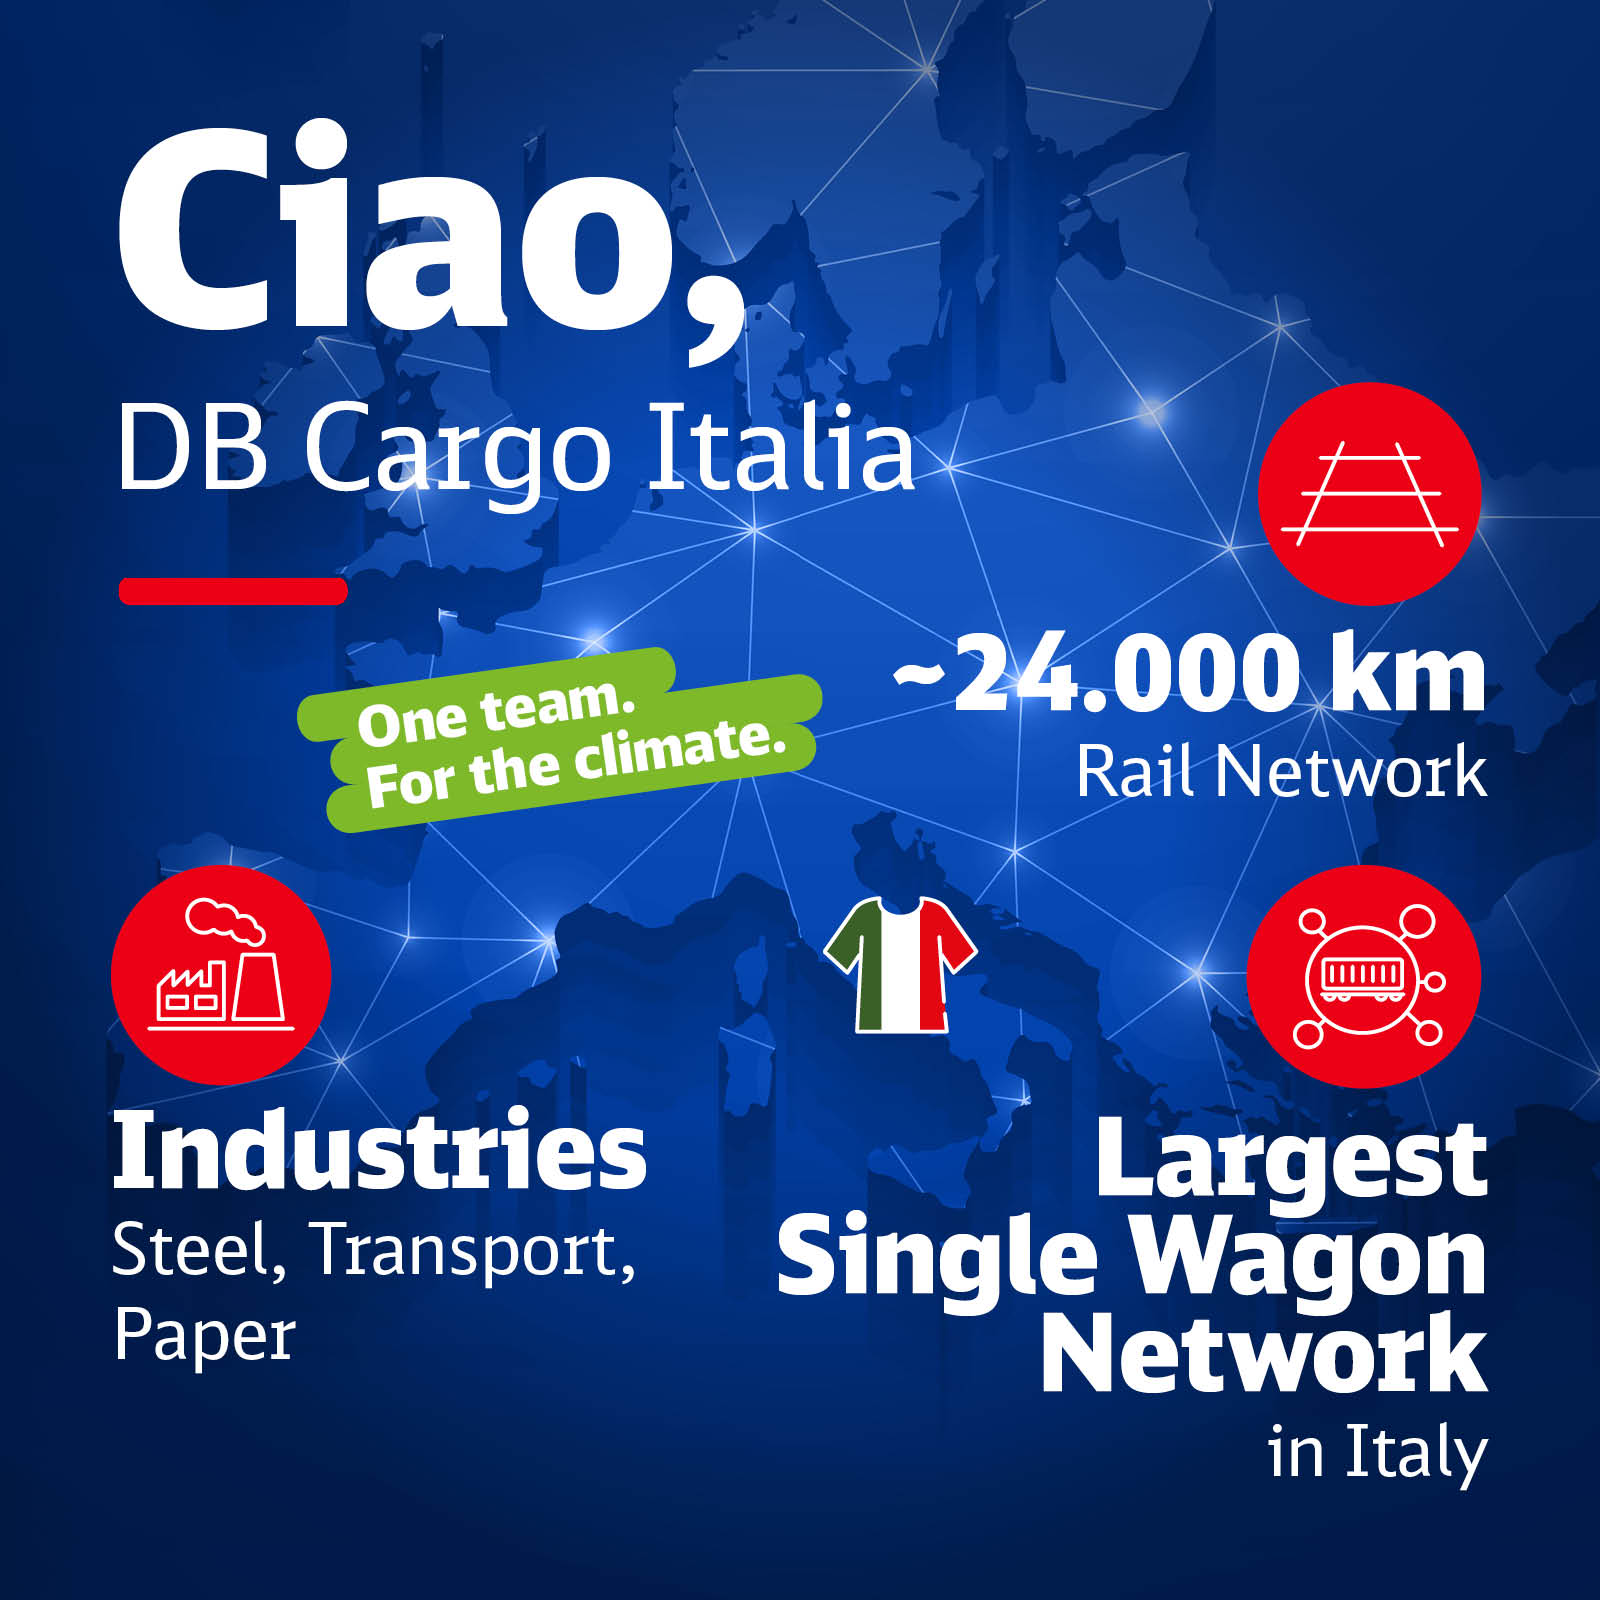  A map of Europe with information about DB Cargo Italia.